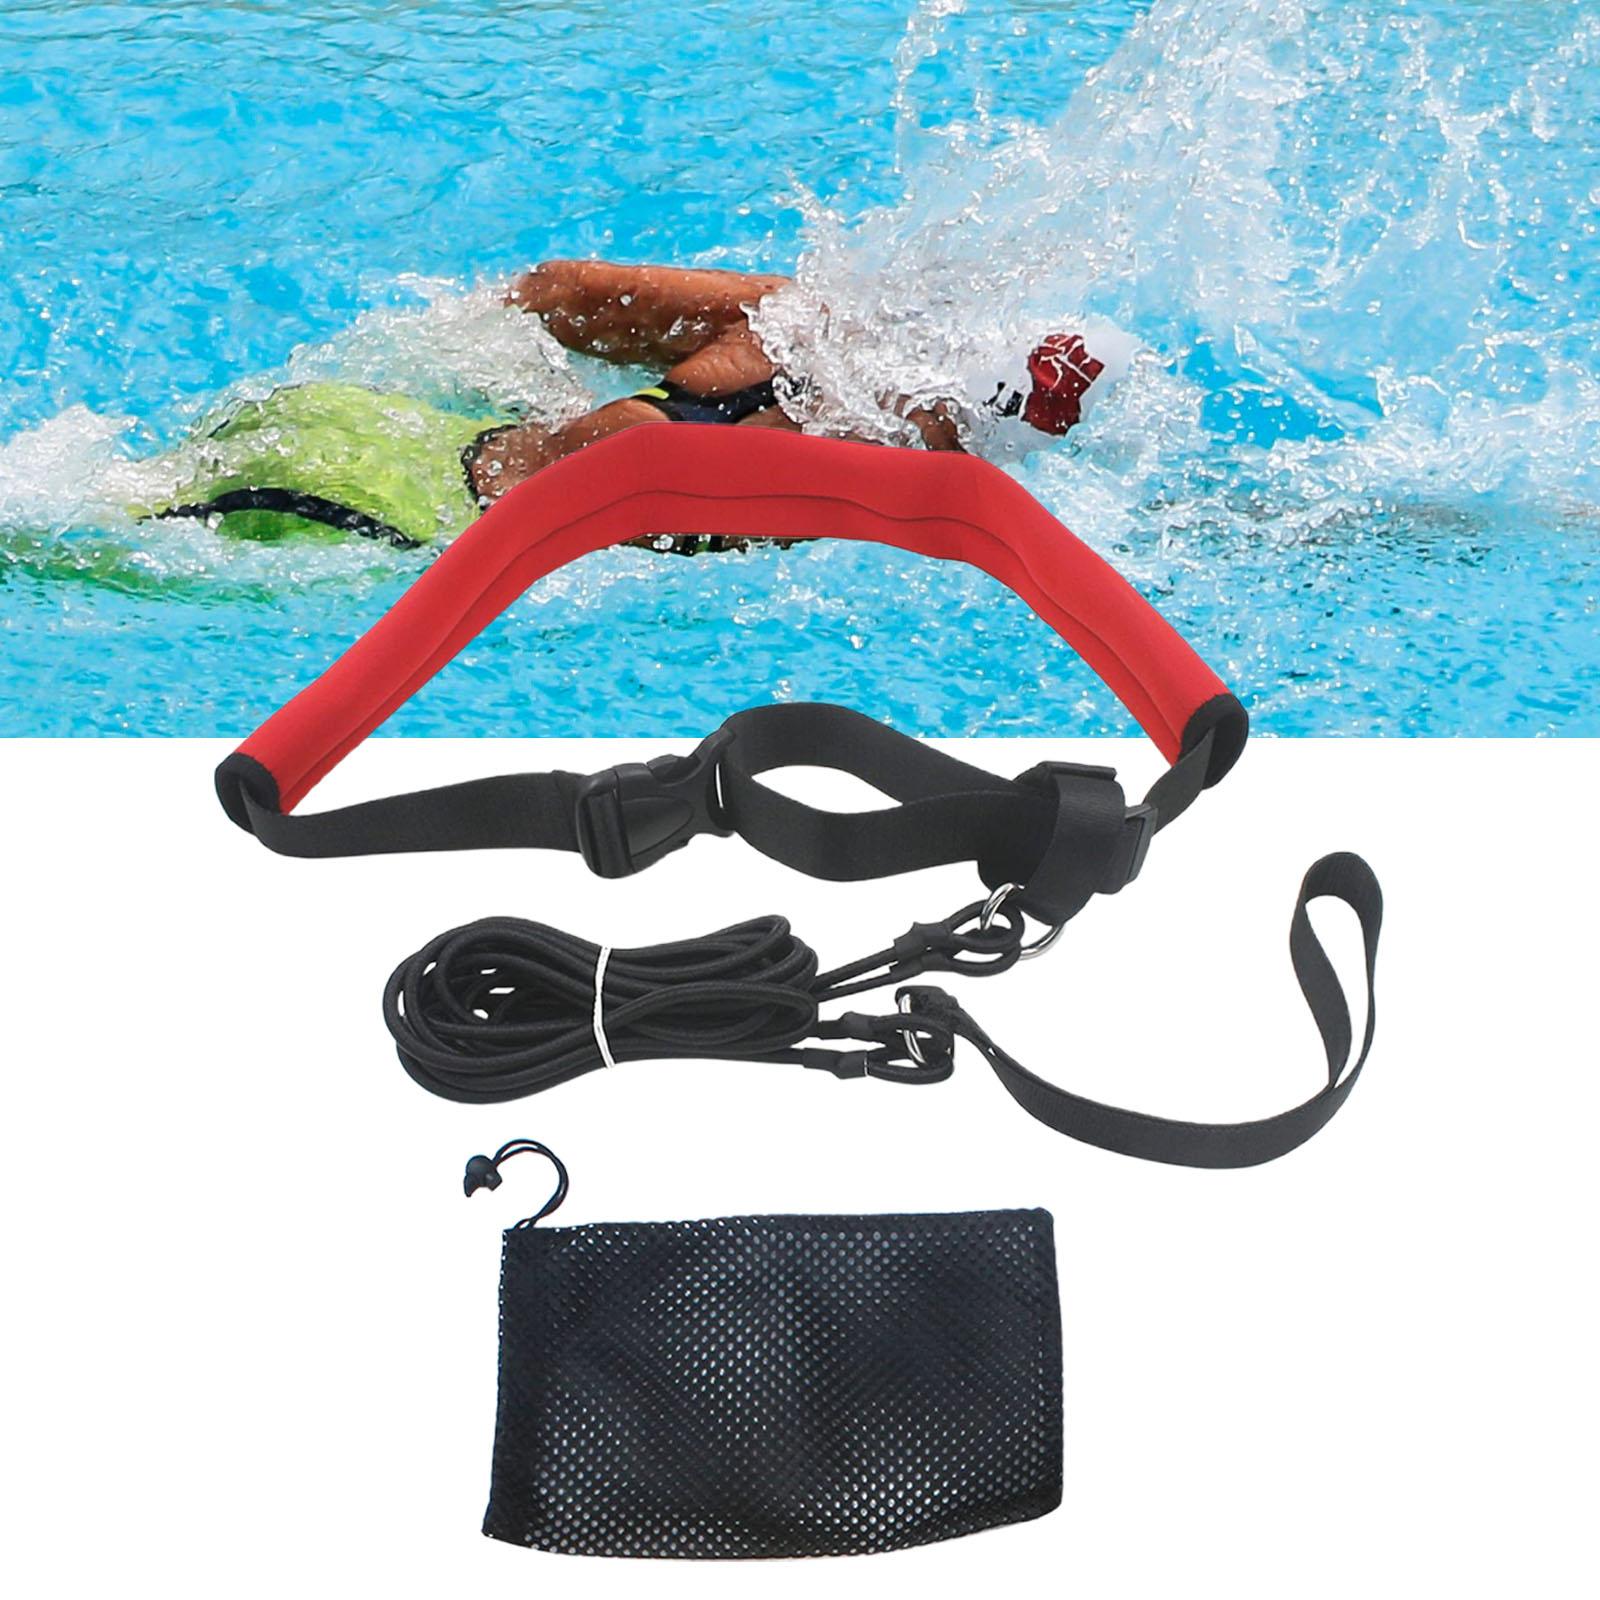 Swim Resistance Tether Stationary Swimming for Adults Professionals Athletes Red